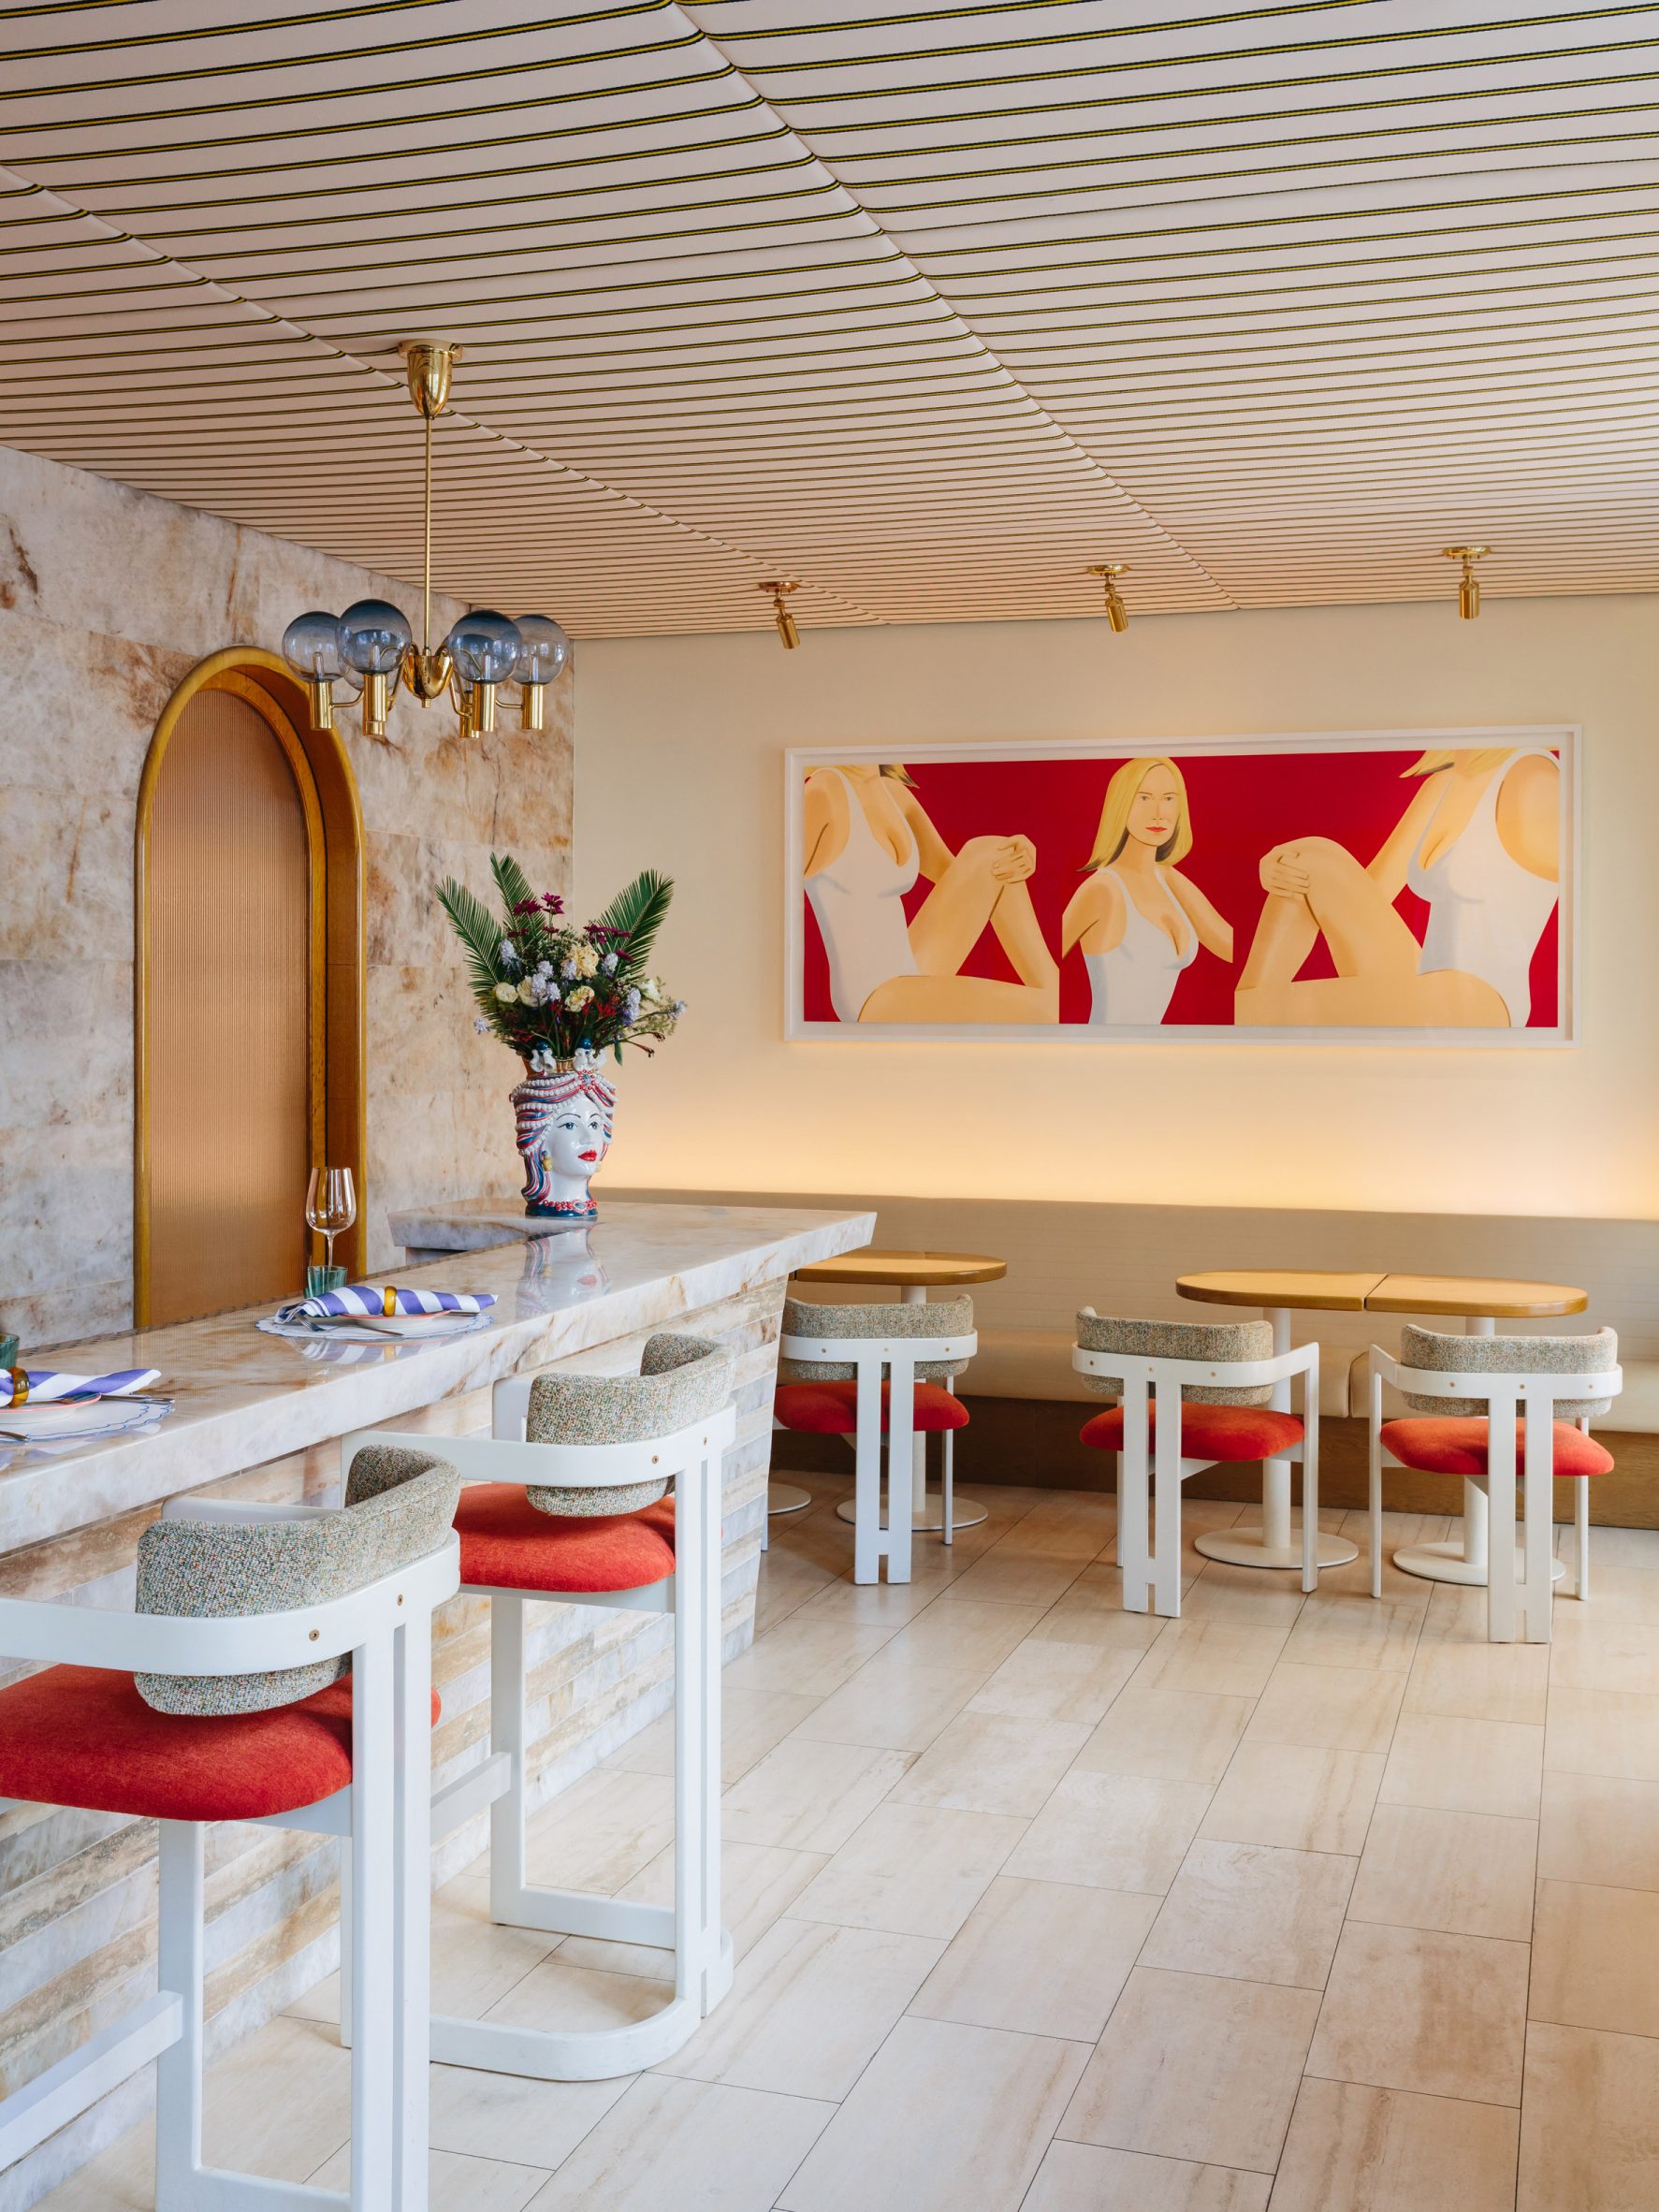 Bar area with striped fabric ceiling and Alex Katz painting